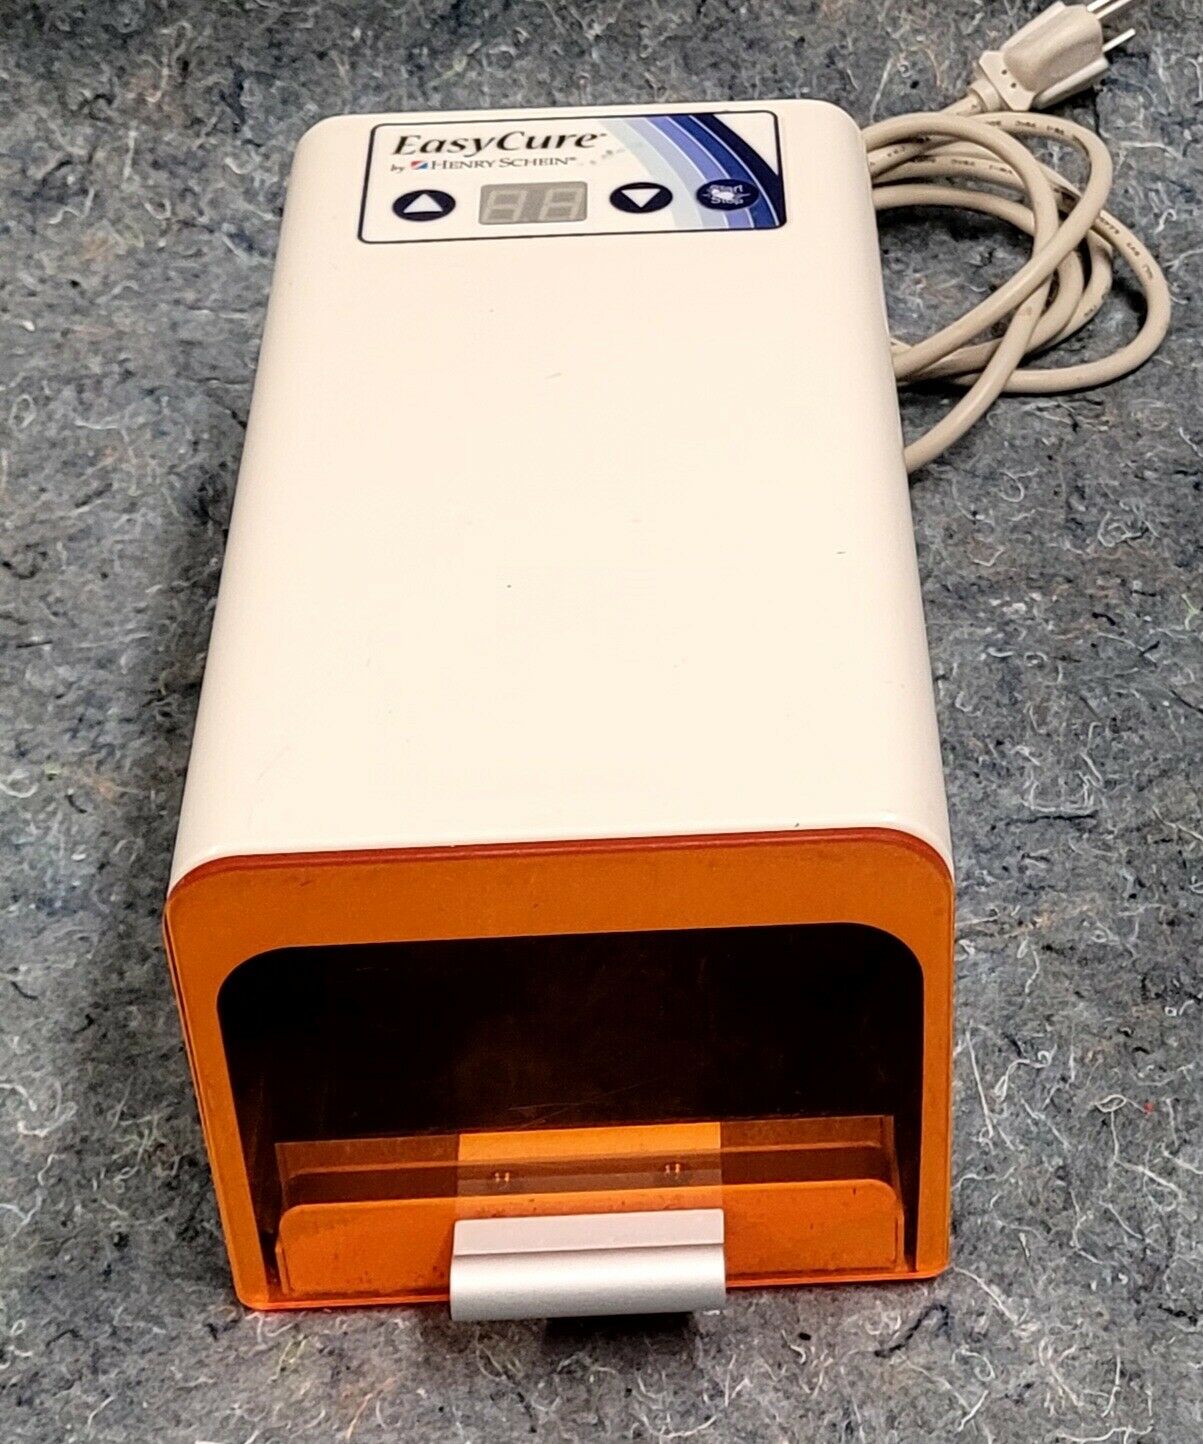 Henry Schein Easy Cure Light Curing Unit